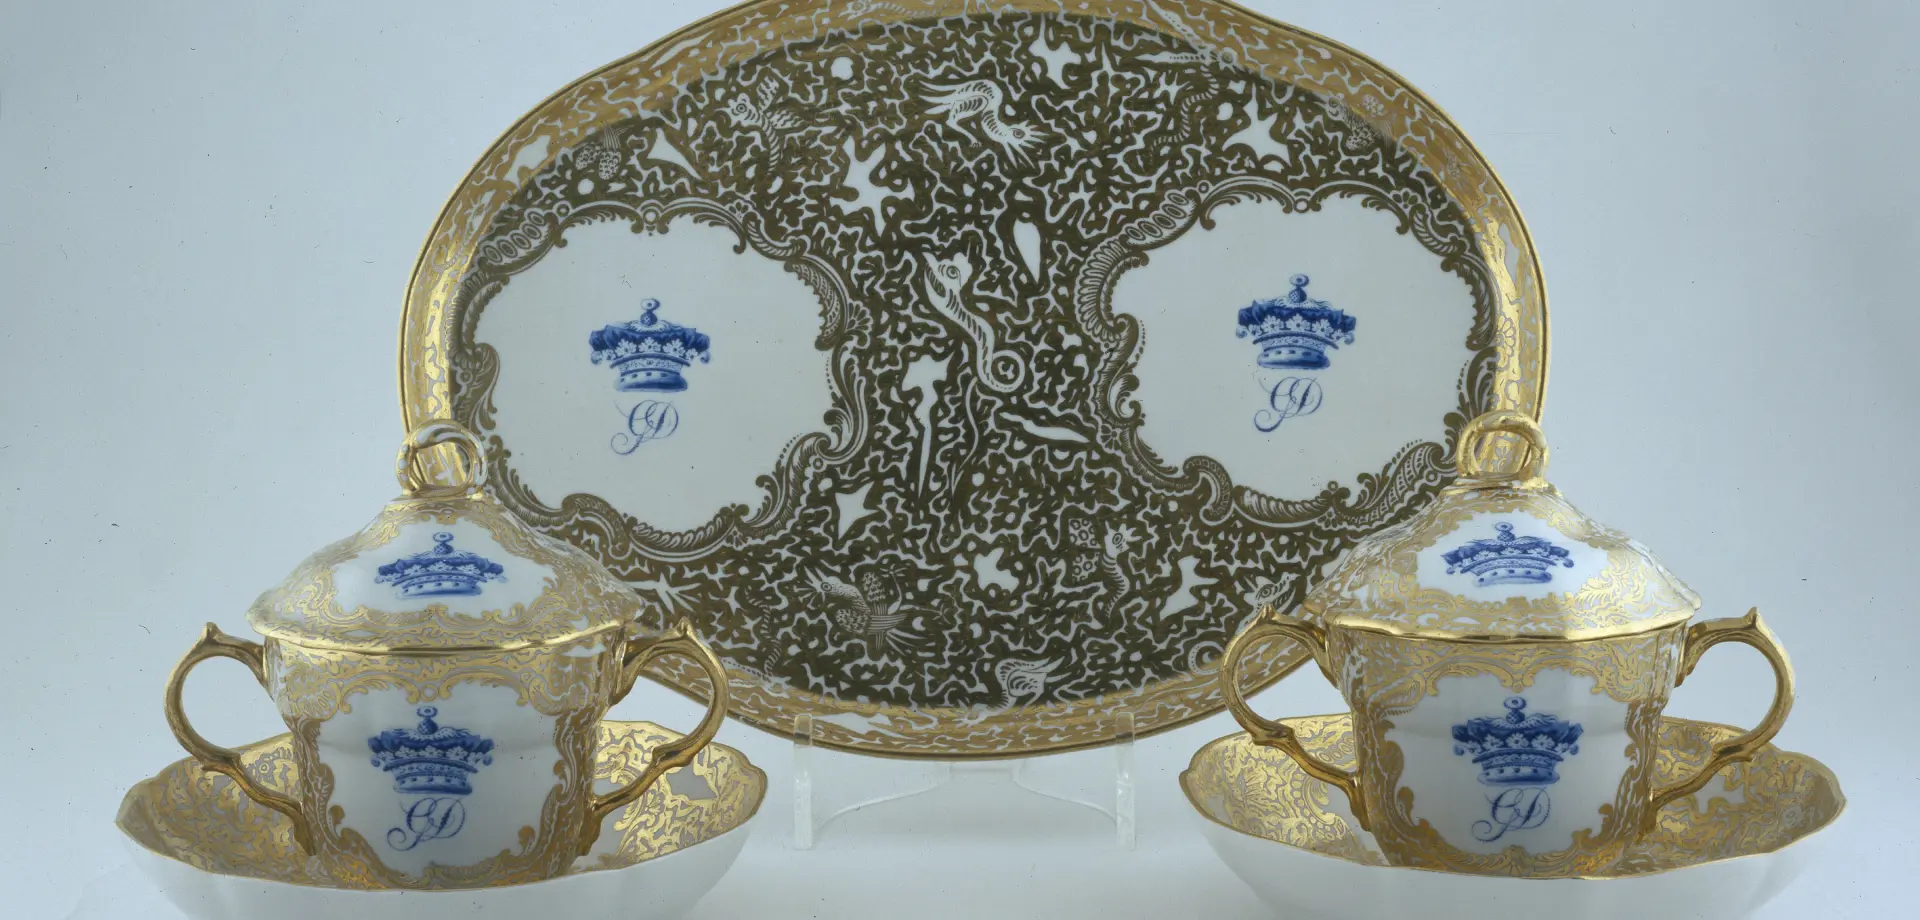 Derby caudle cups, covers, stands and an oval tray